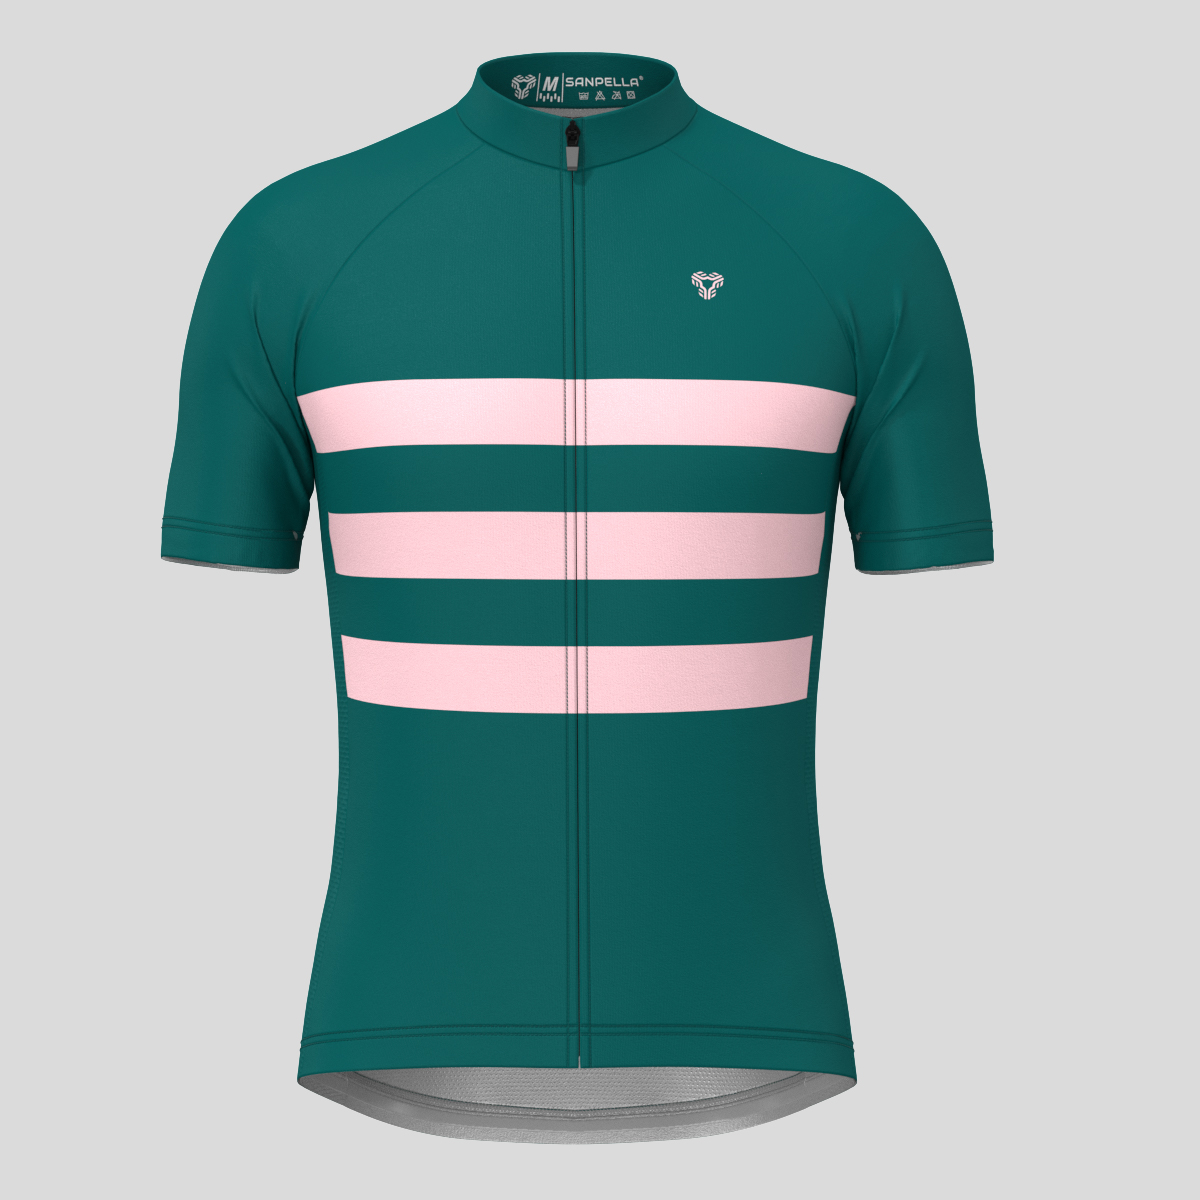 Men's Classic Stripes Cycling Jersey - Midnight/Pink